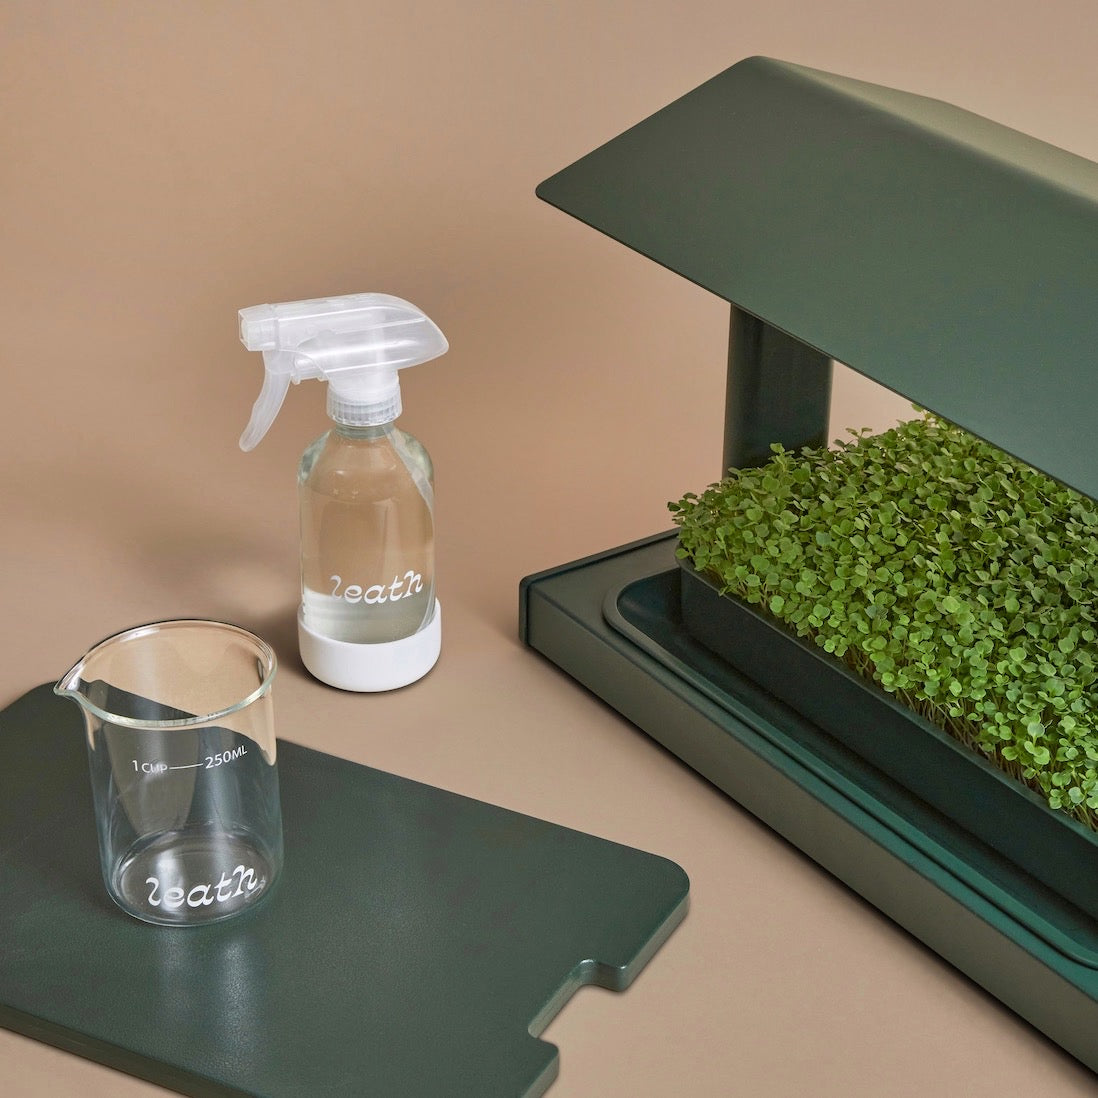 The Fieldhouse comes with a germination lid, watering cup, and spray bottle